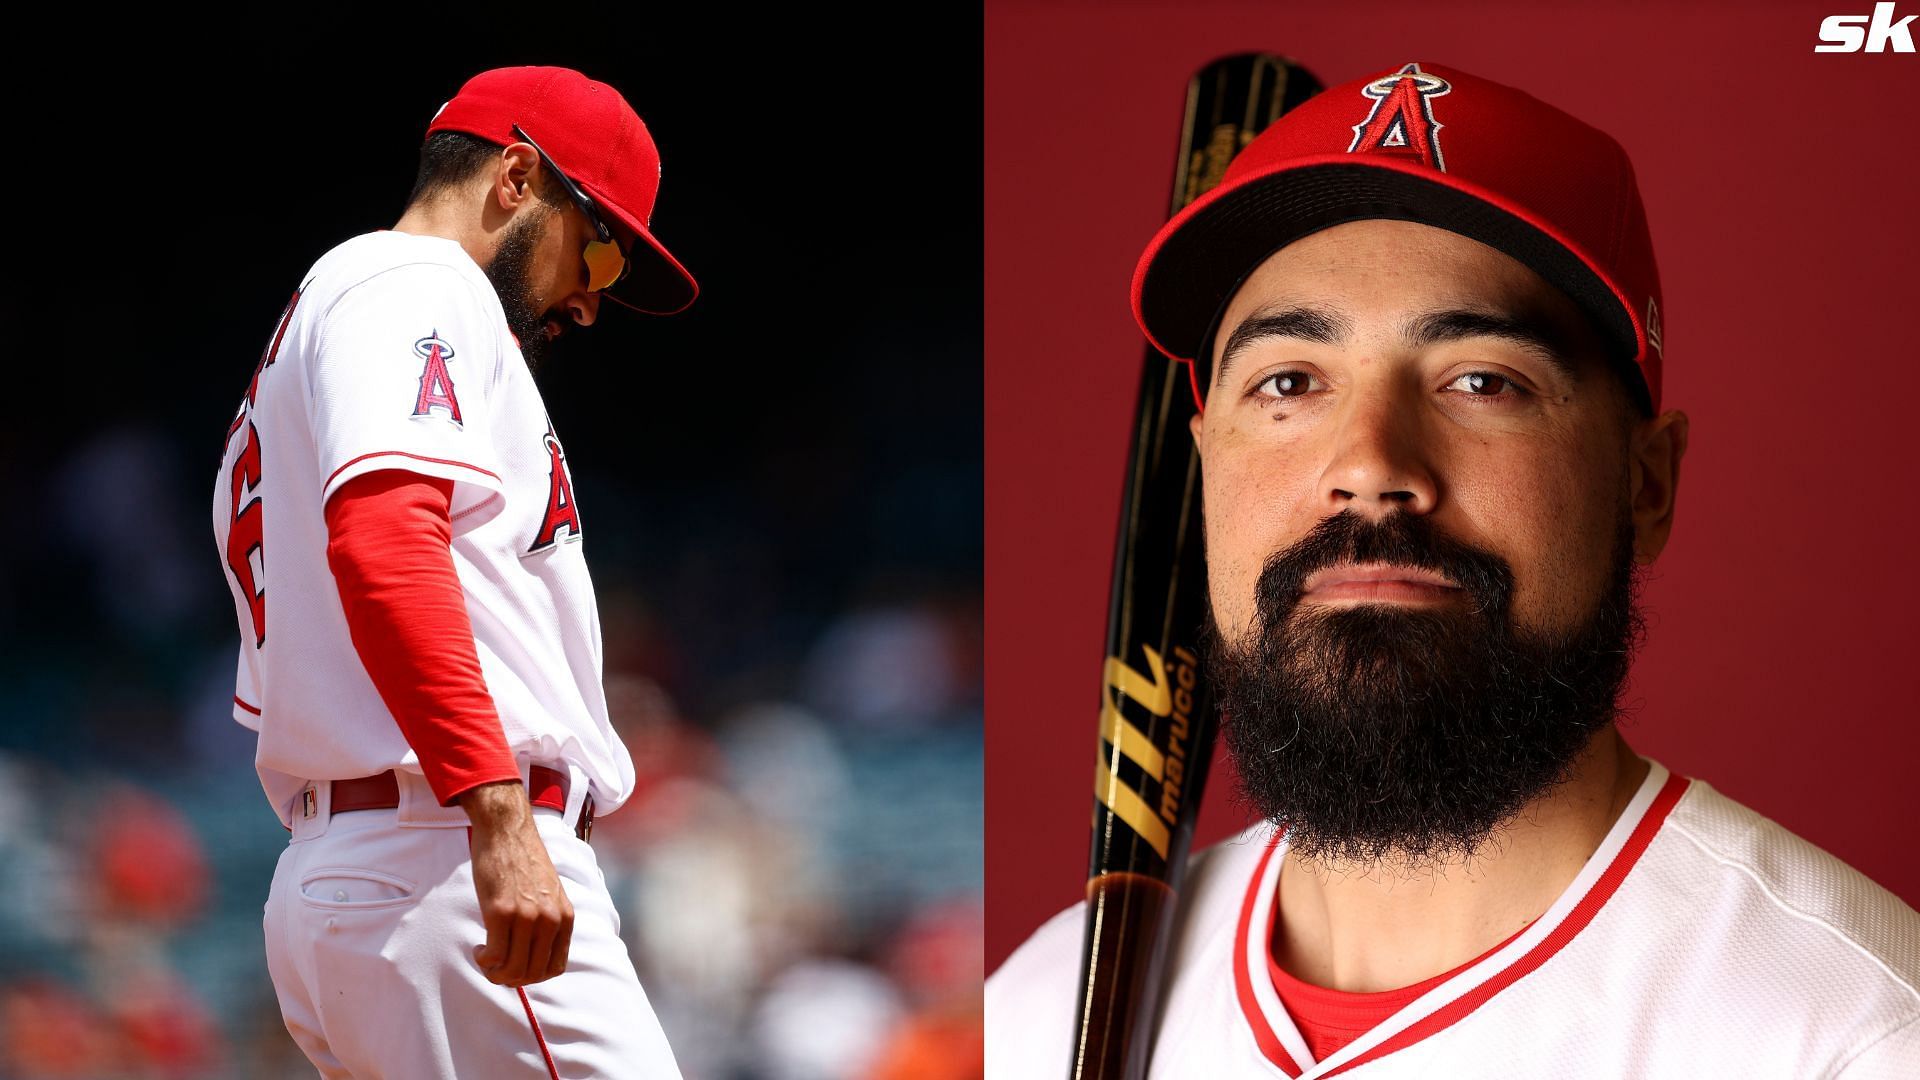 Best to save the bigger injuries for later" - Anthony Rendon faces mockery  as Angels star hopes to return to action 'soon'